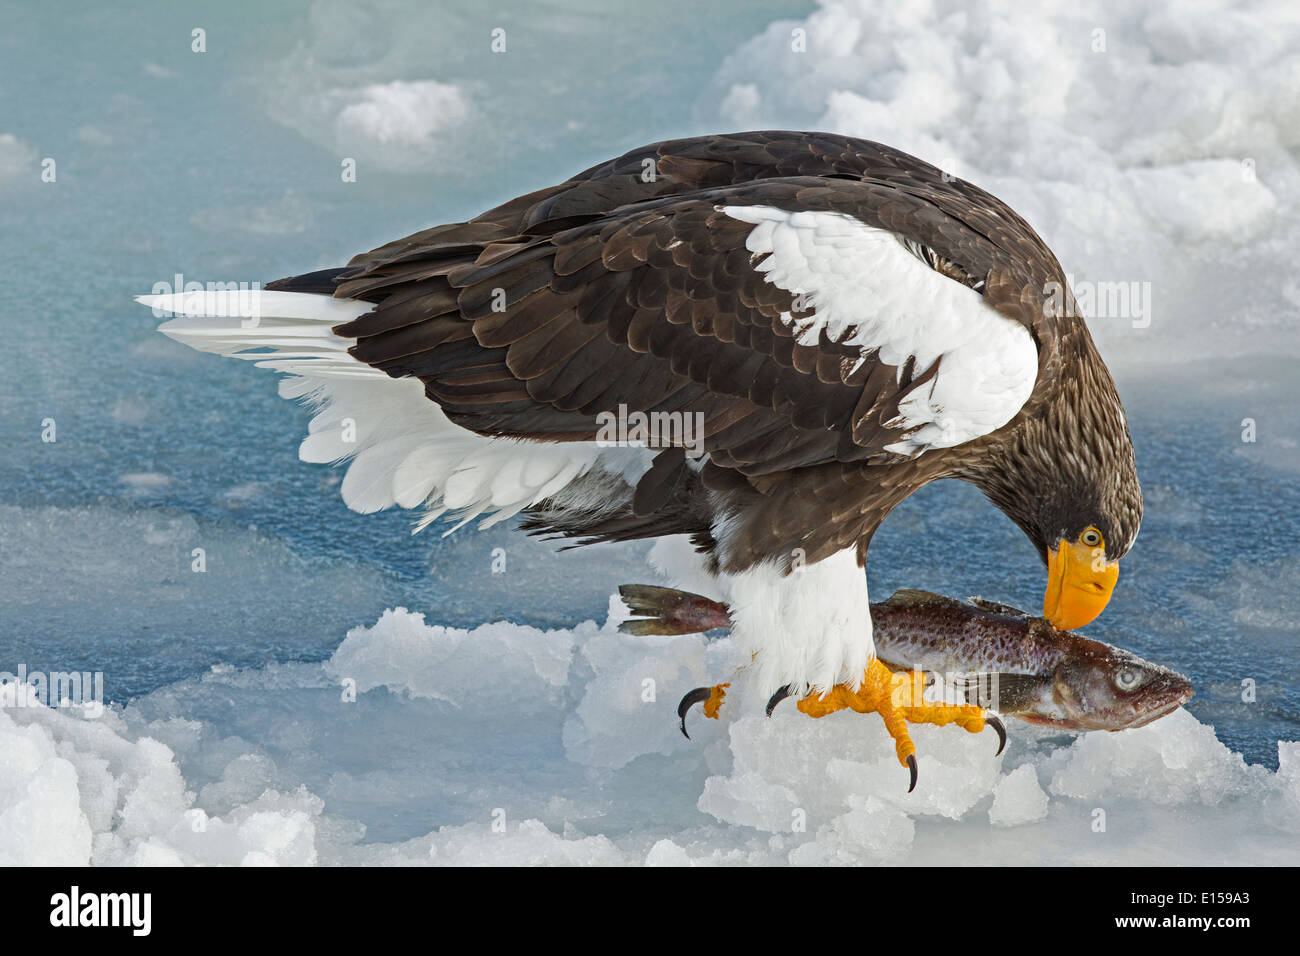 Steller's sea eagle on ice floe with fish Stock Photo